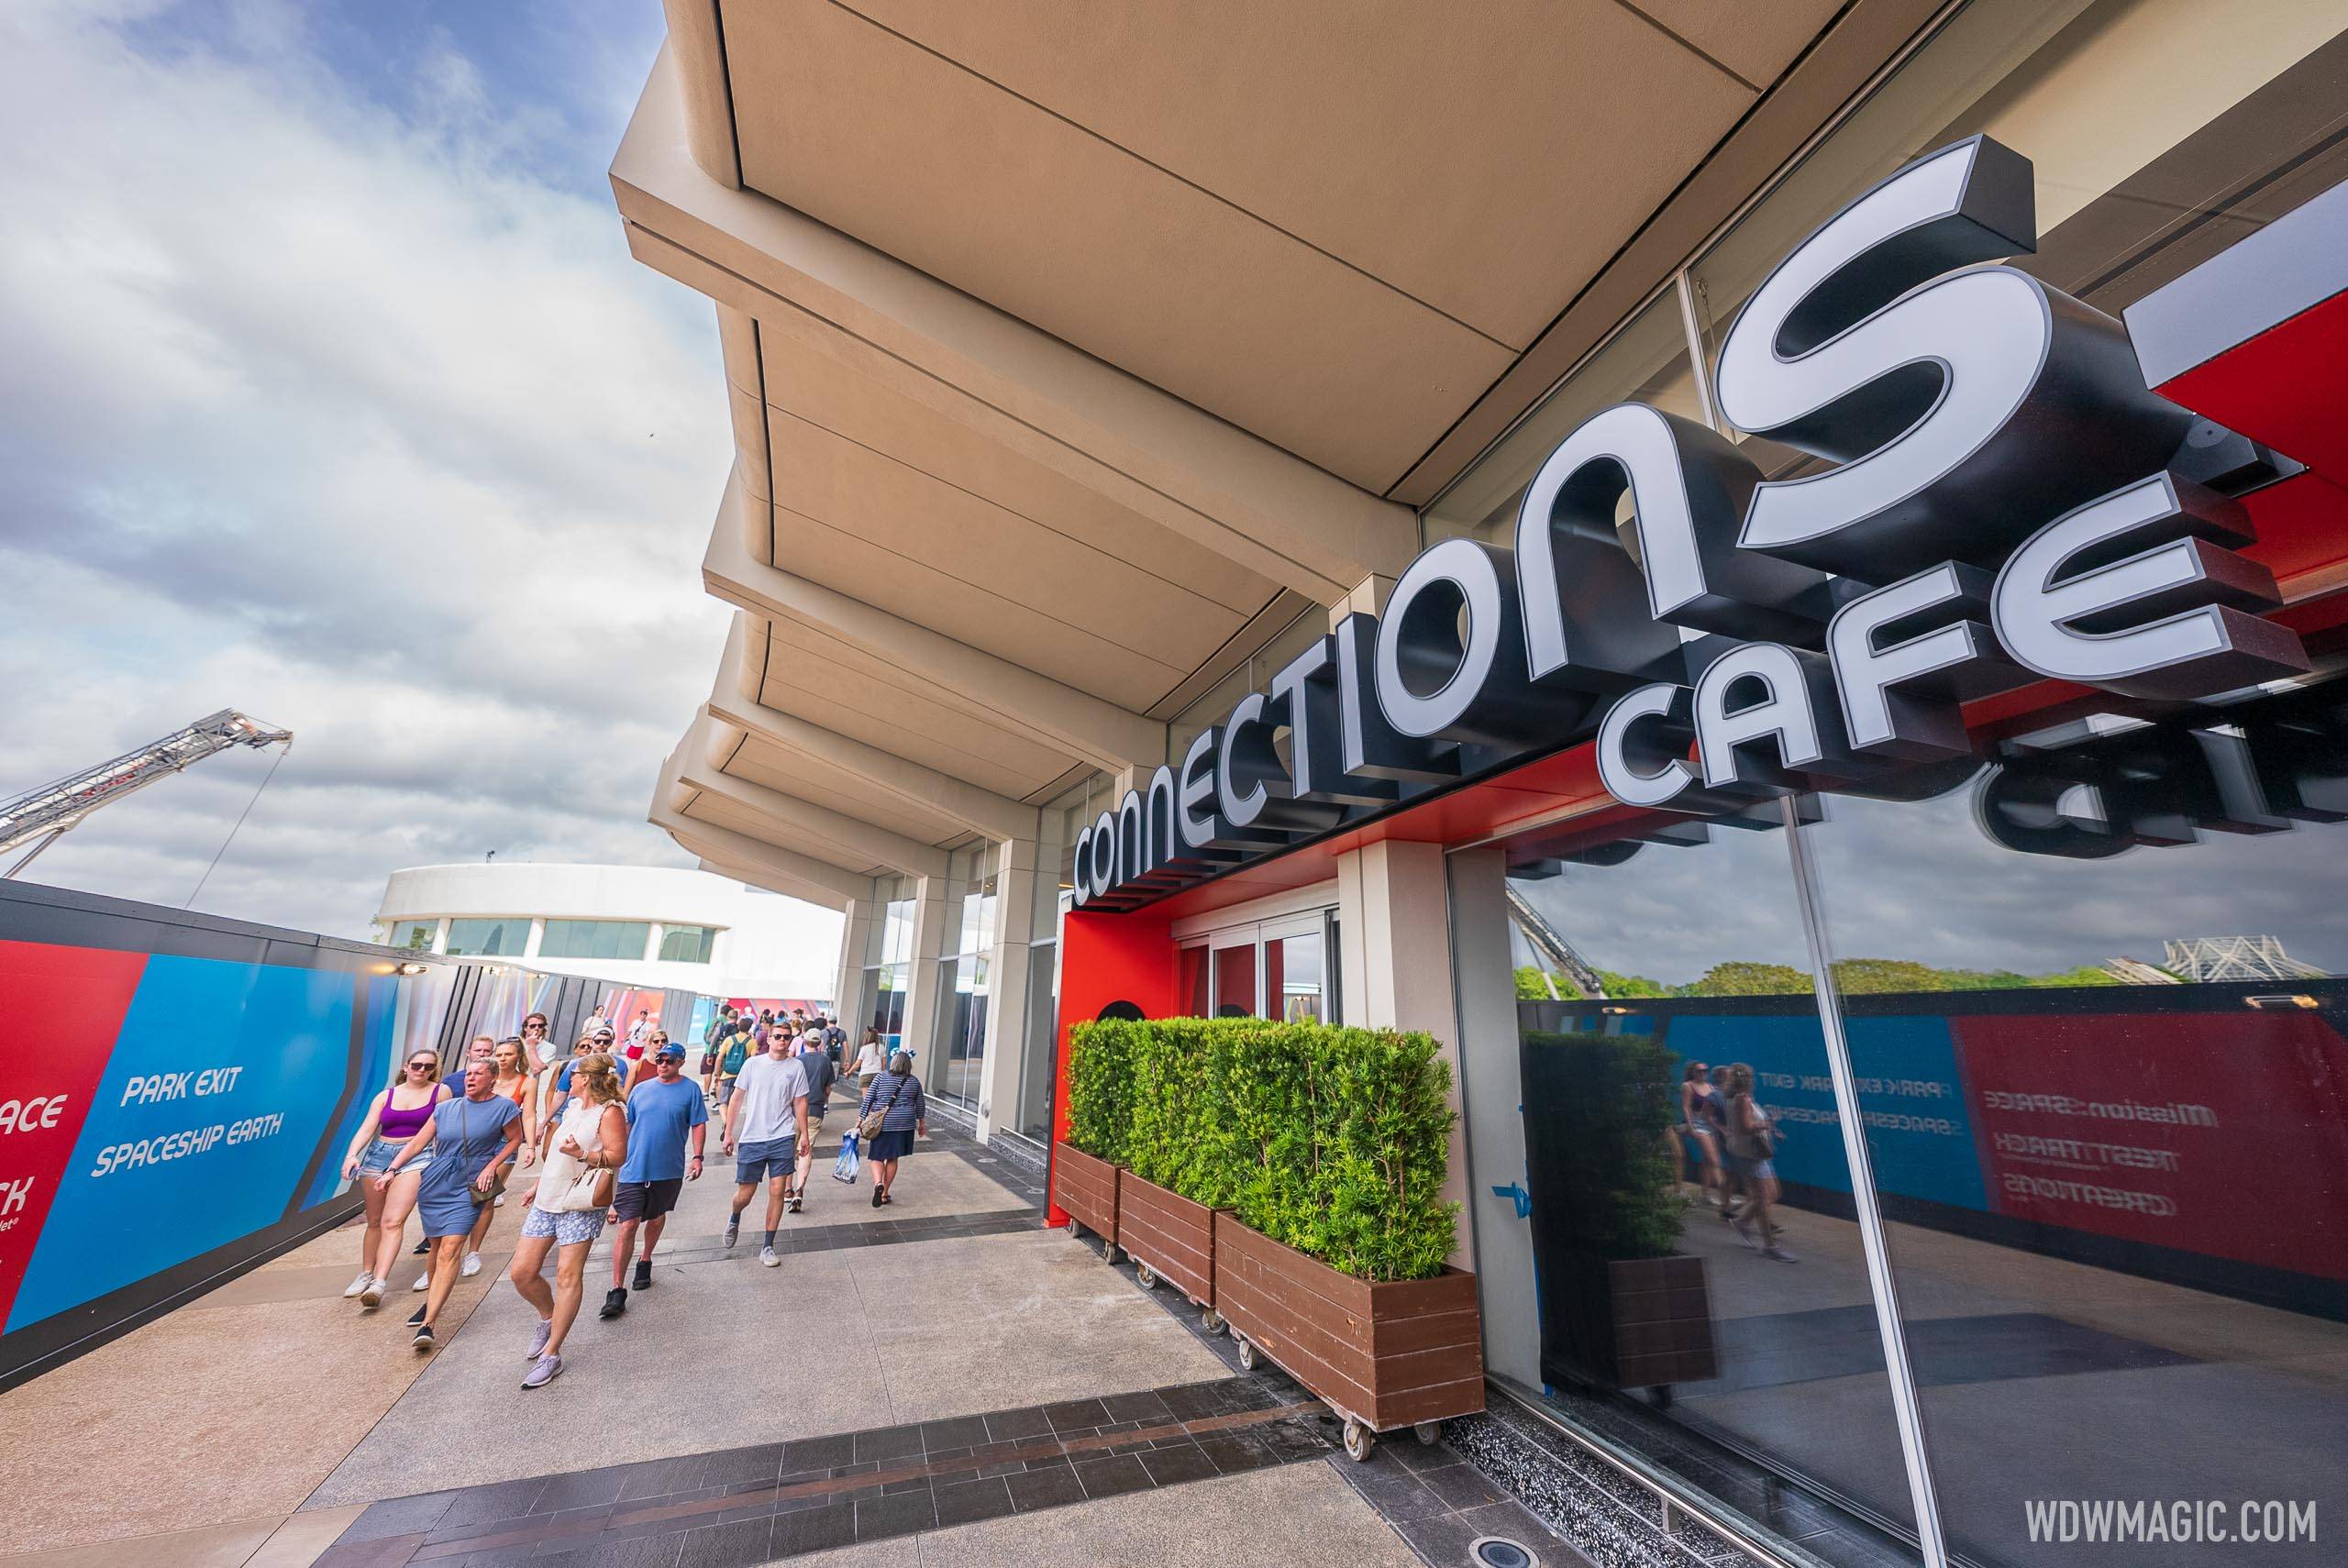 One of the five entrances to Connections Cafe from the new walkway